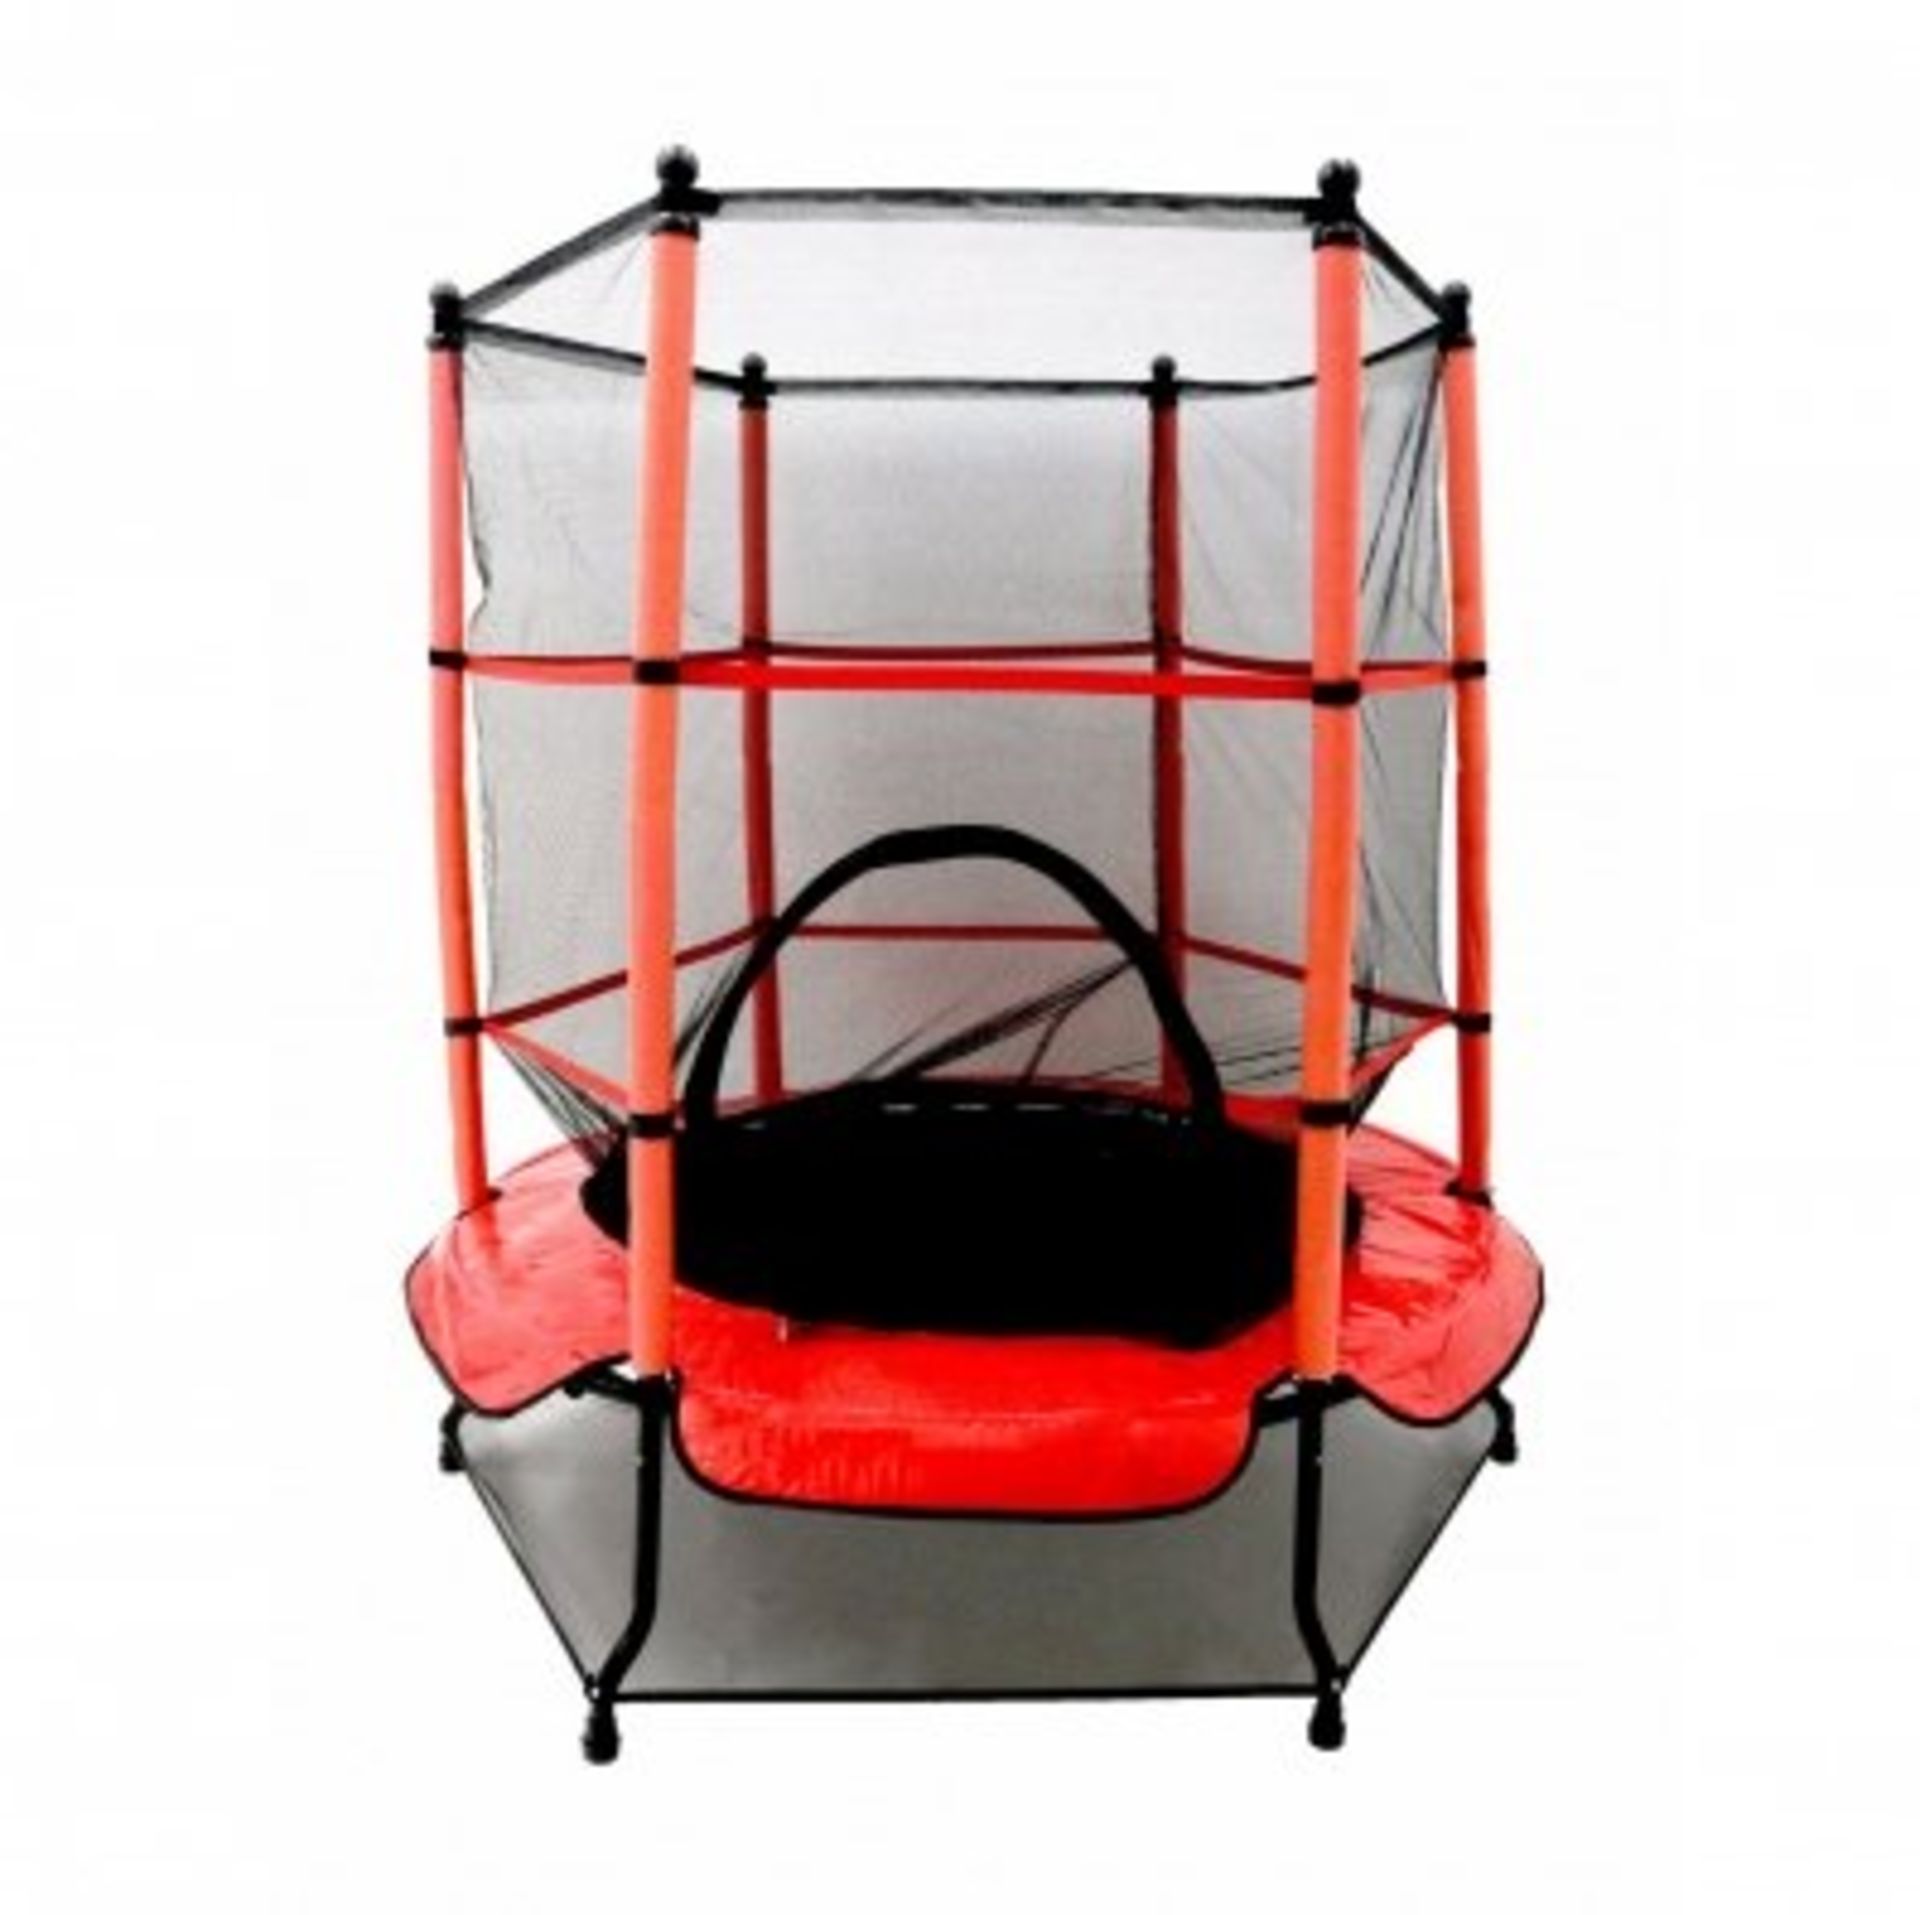 (SP479) 55" Kids Trampoline with Safety Net and Red Spring Cover Garden Outdoors This trampo...